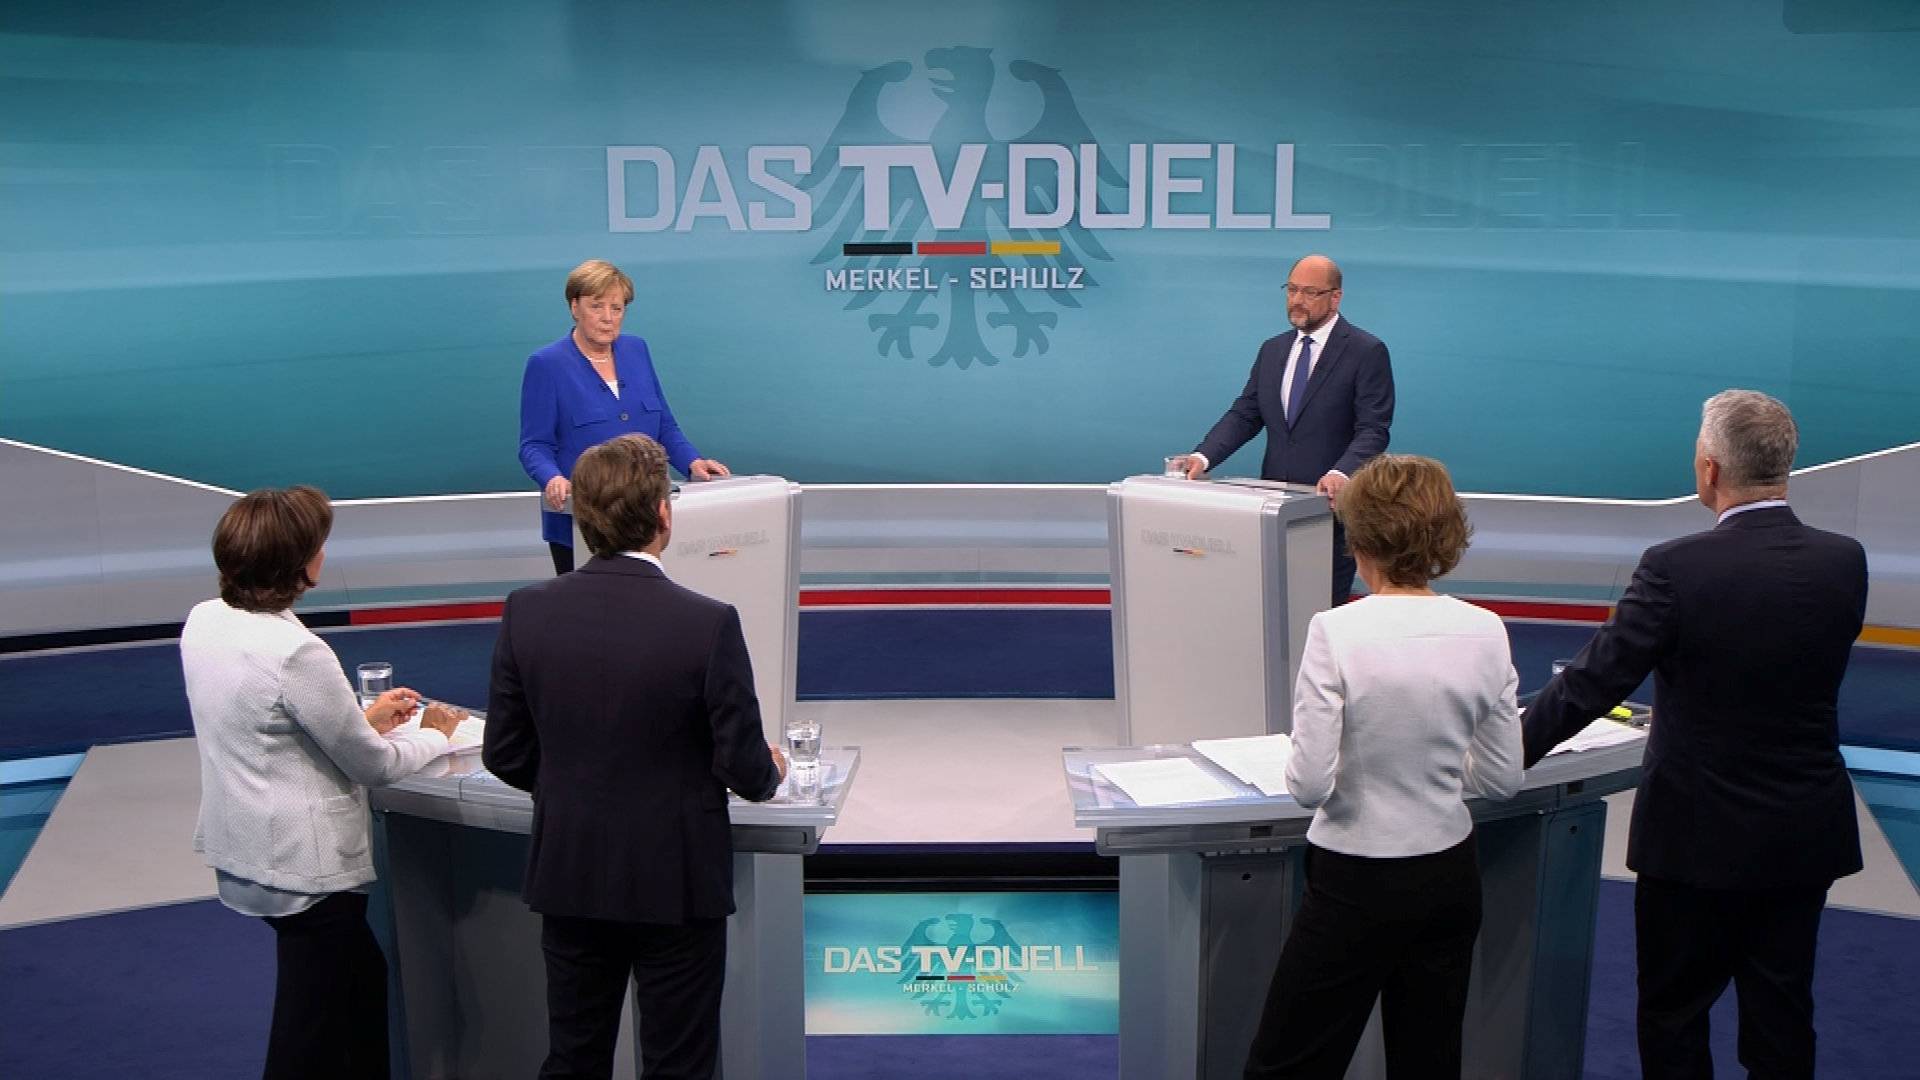 A screen that shows the TV debate between German Chancellor Angela Merkel of the Christian Democratic Union (CDU) and her challenger Germany's Social Democratic Party SPD candidate for chancellor Martin Schulz in Berlin